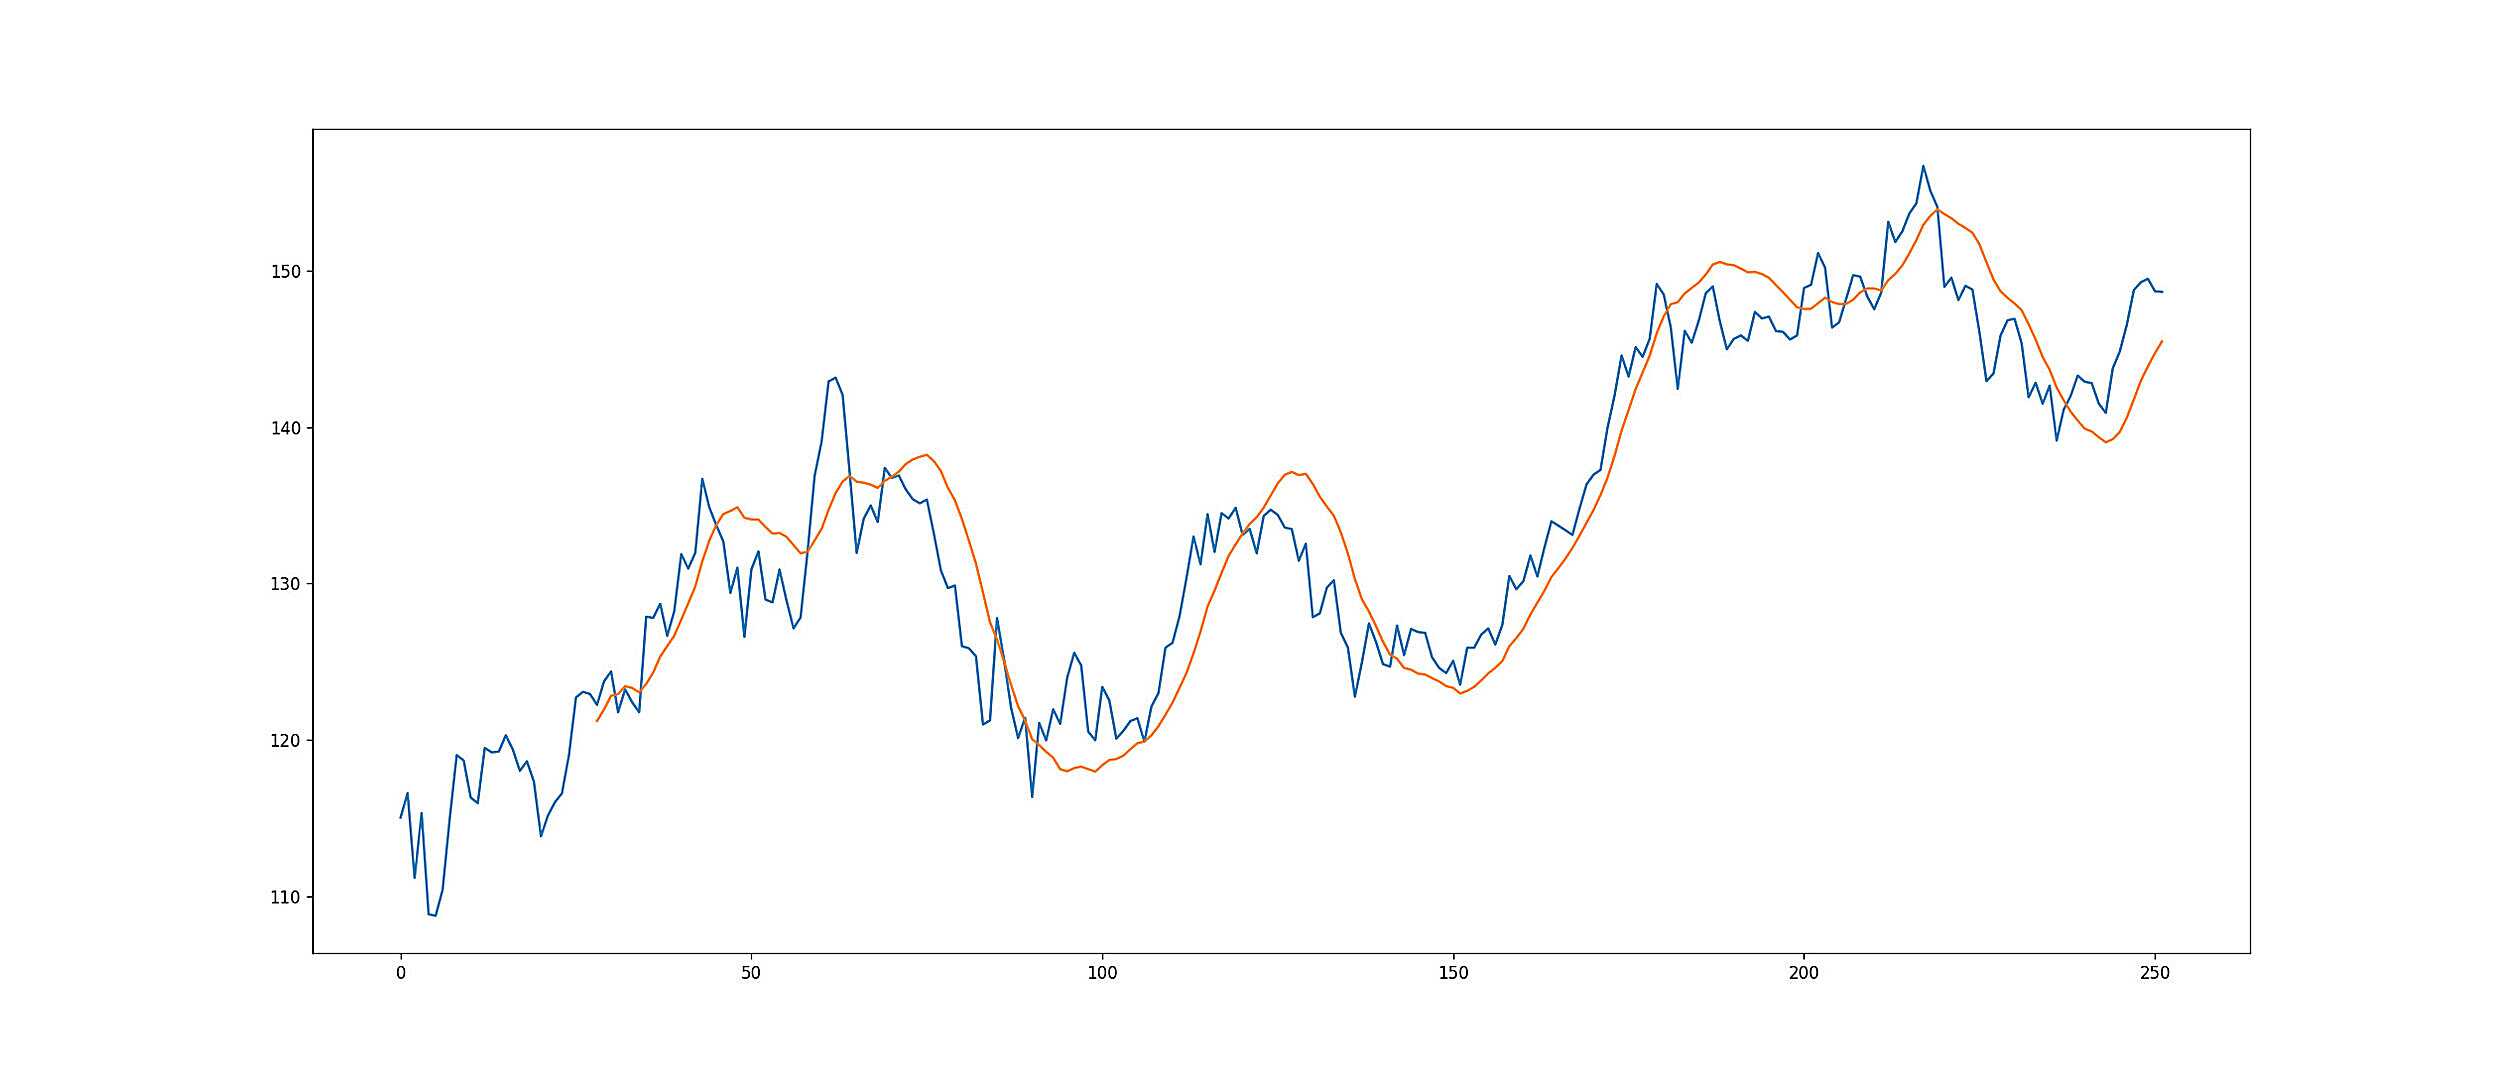 linear regression forecast in python